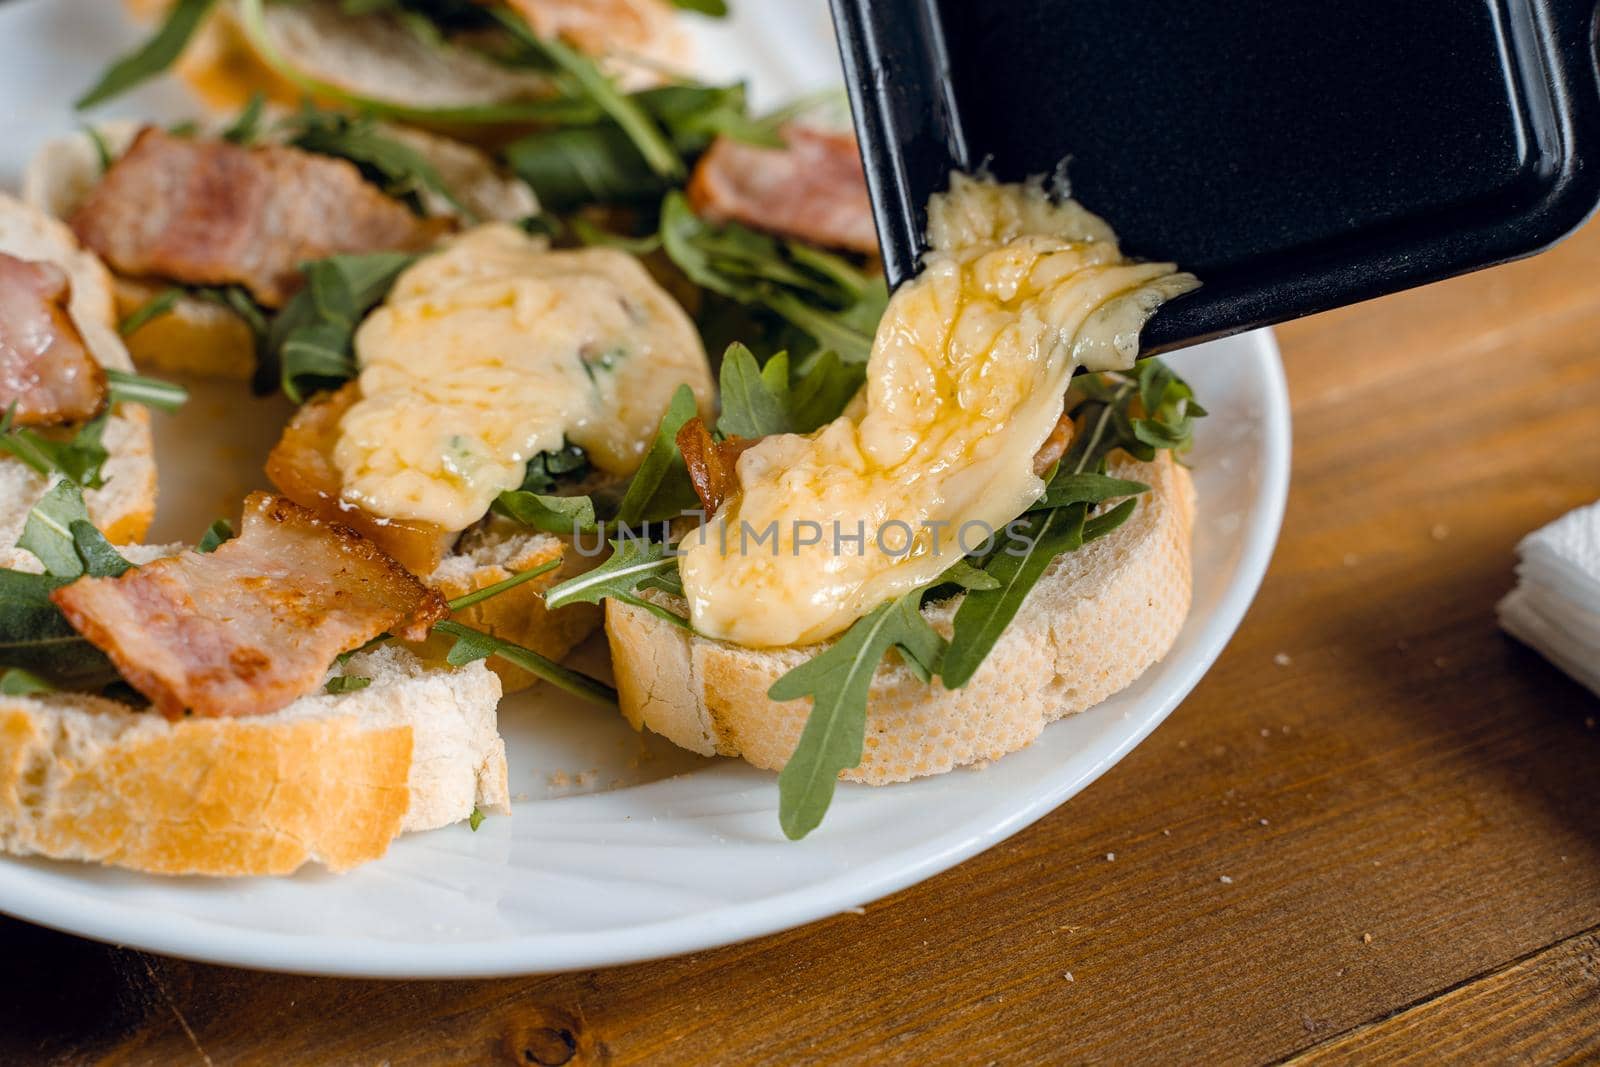 Raclette melted cheese for sandwich with fried bacon and arugula traditional french cuisine. Plate with snacks